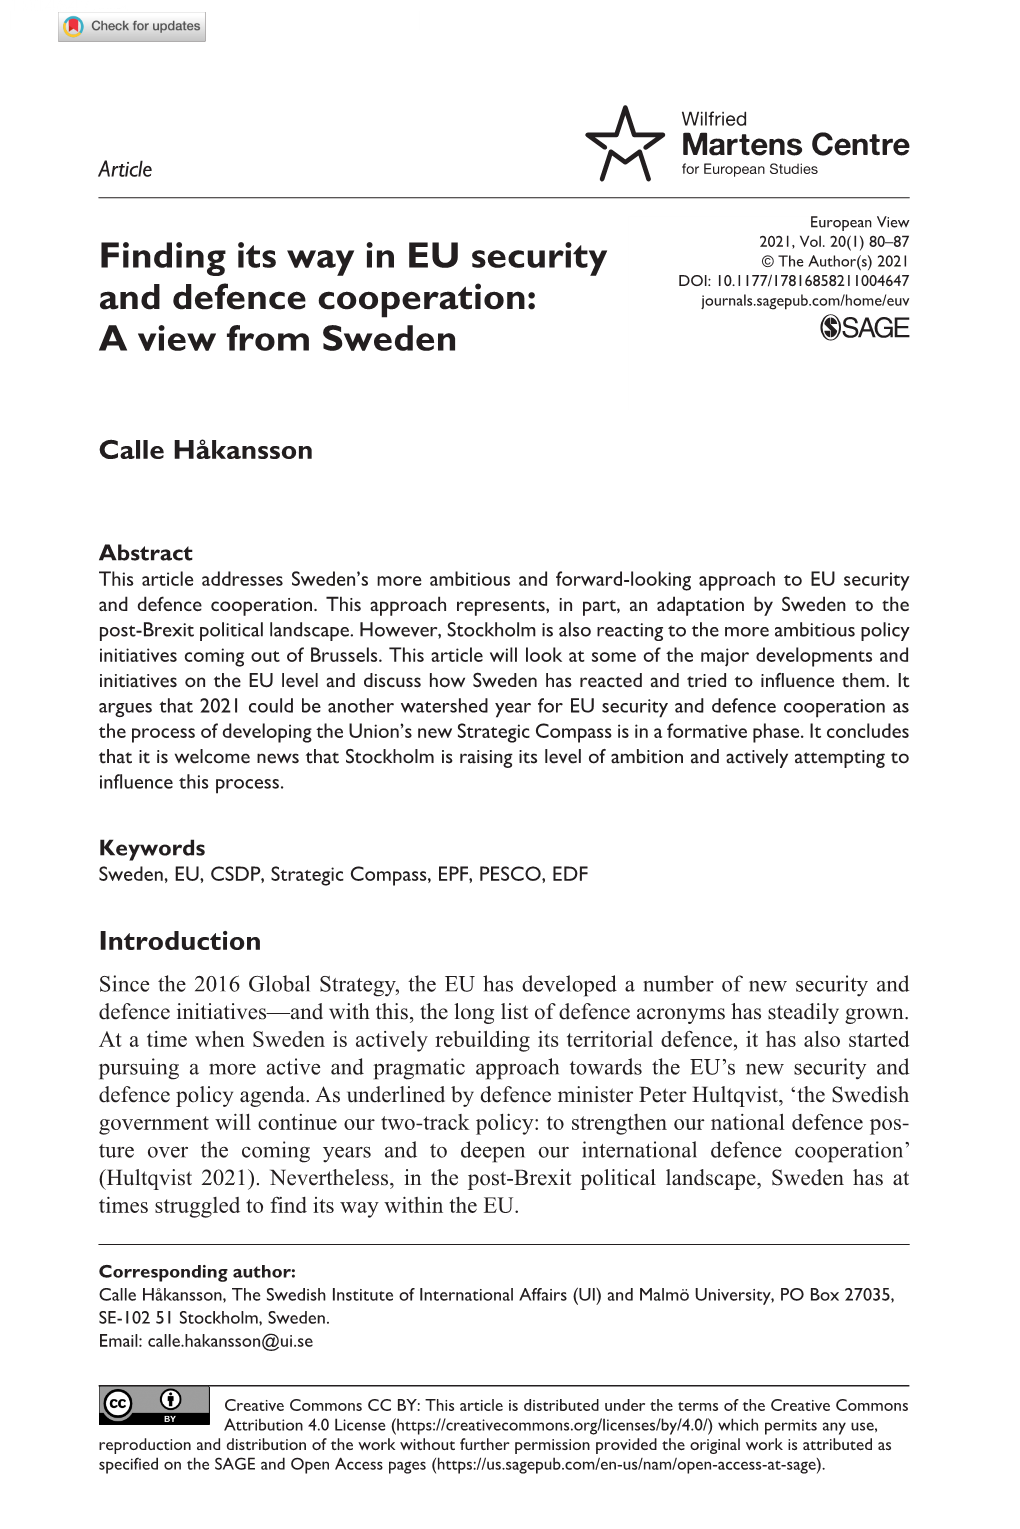 Finding Its Way in EU Security and Defence Cooperation